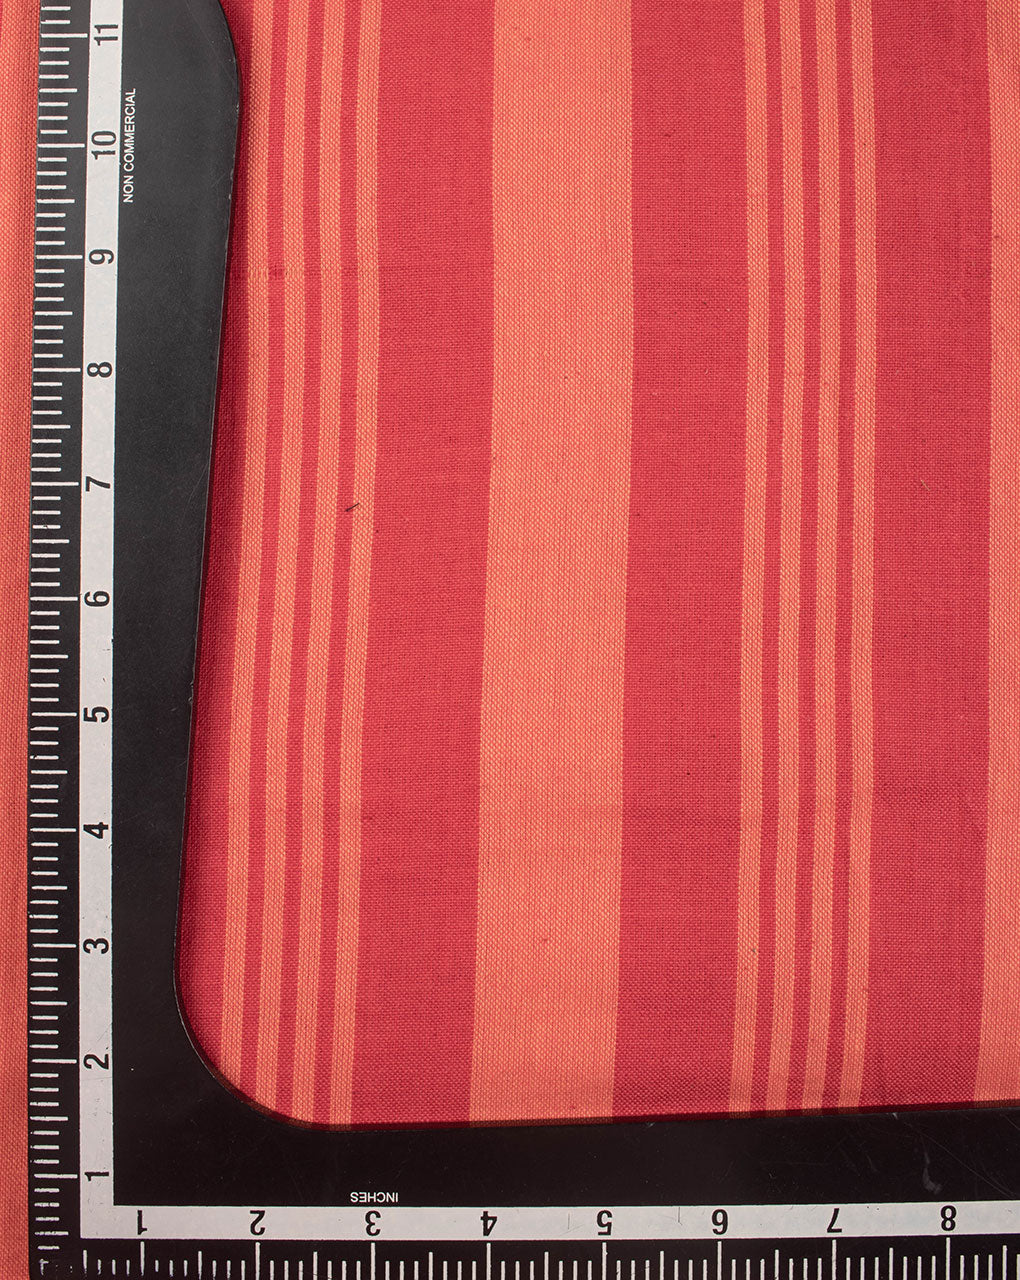 Stripes Woven Loom Textured Cotton Fabric - Fabriclore.com